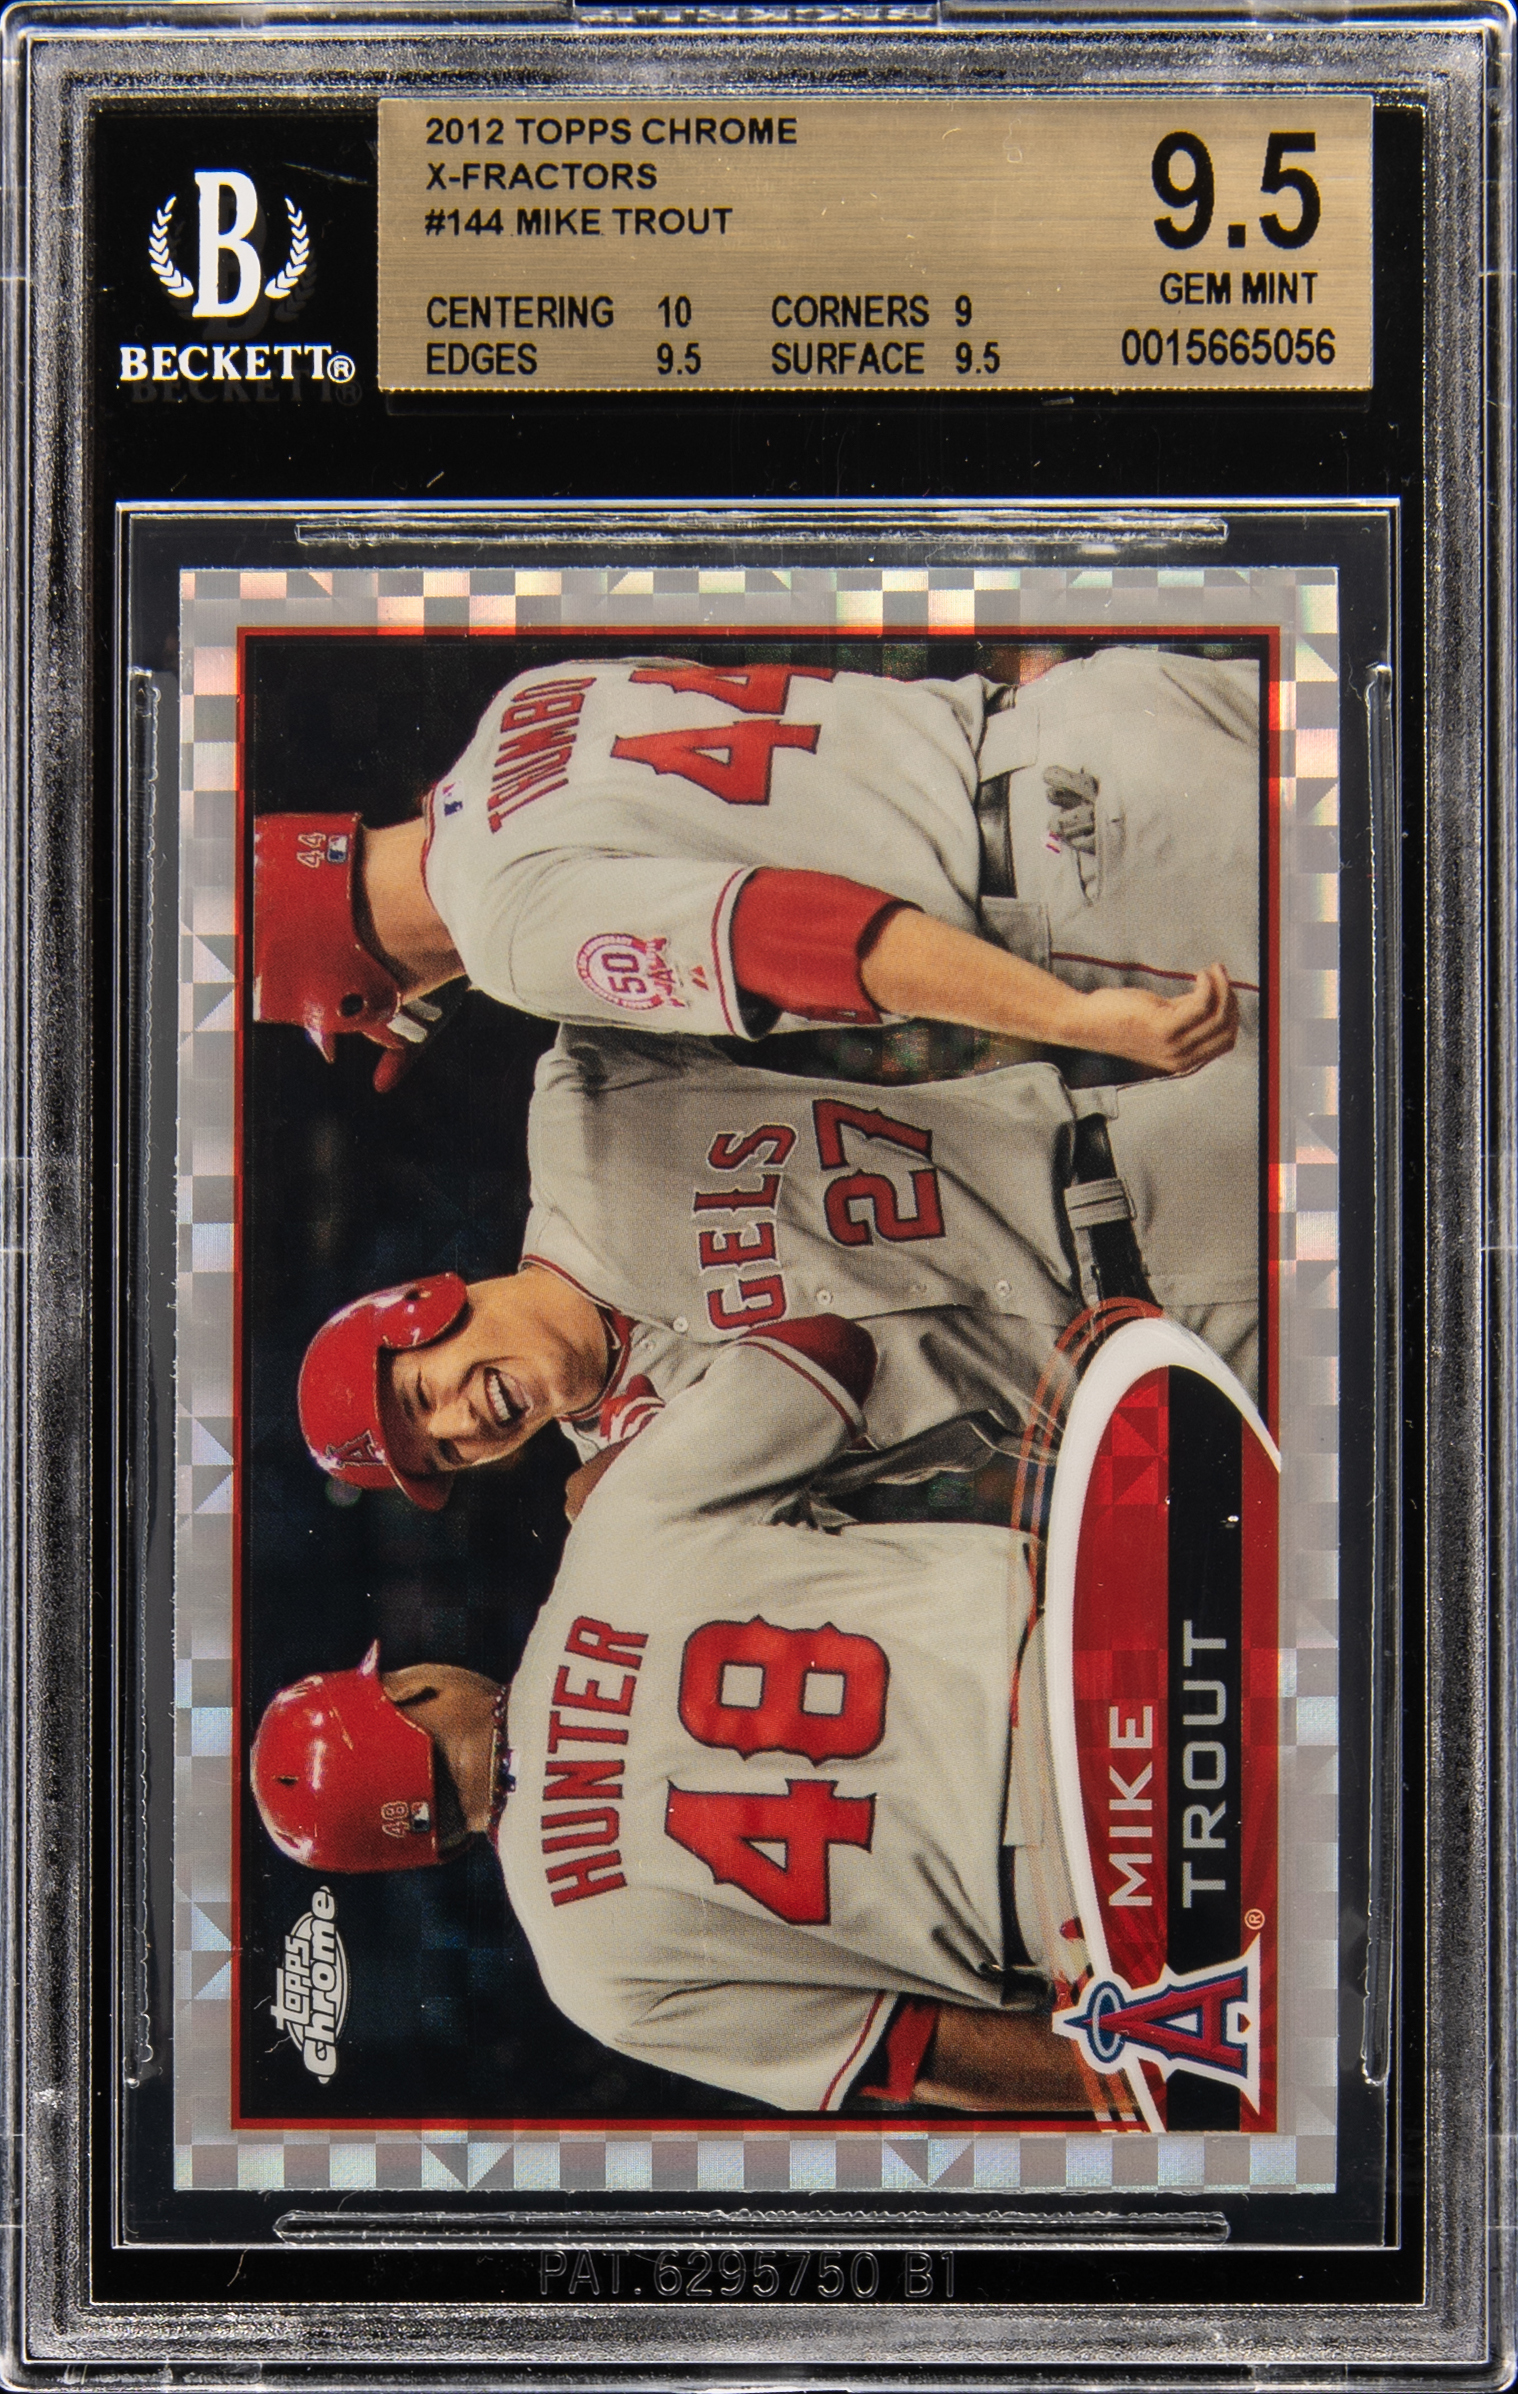 2012 Topps Chrome Xfractor #144 Mike Trout – BGS GEM MINT 9.5